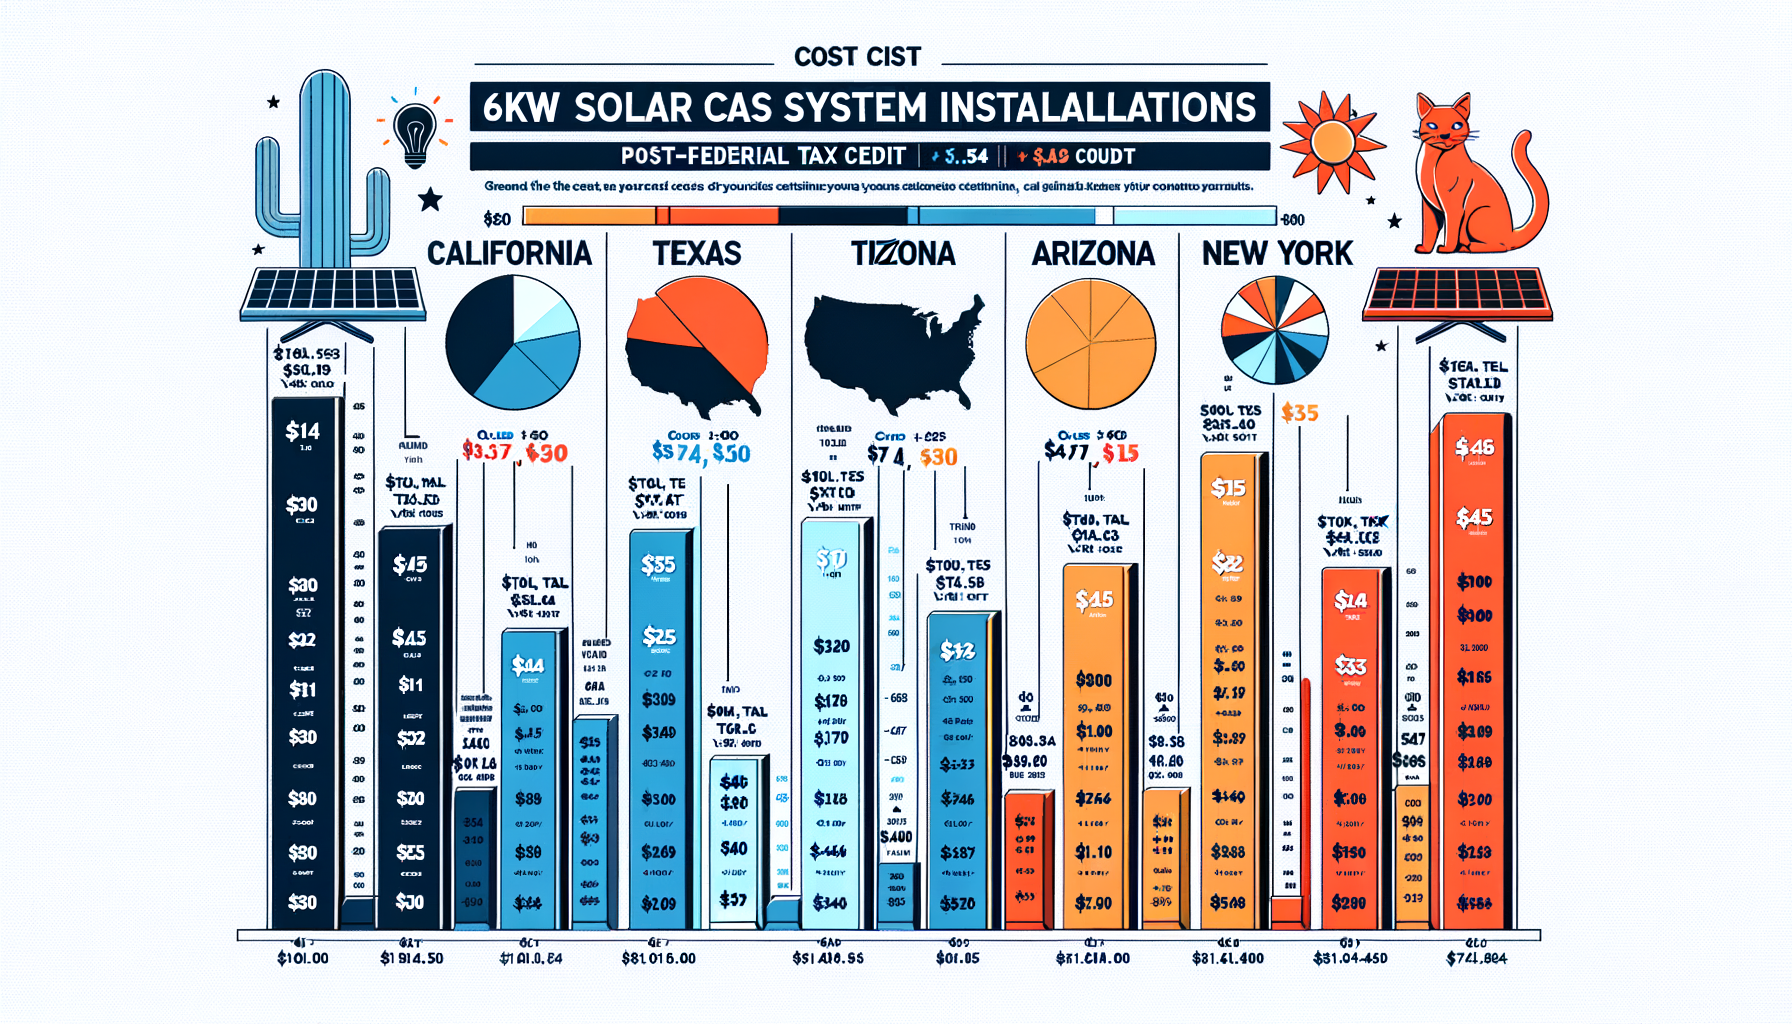 ALT: Infographic showing the cost of 6kW solar system installations by state after federal tax credit